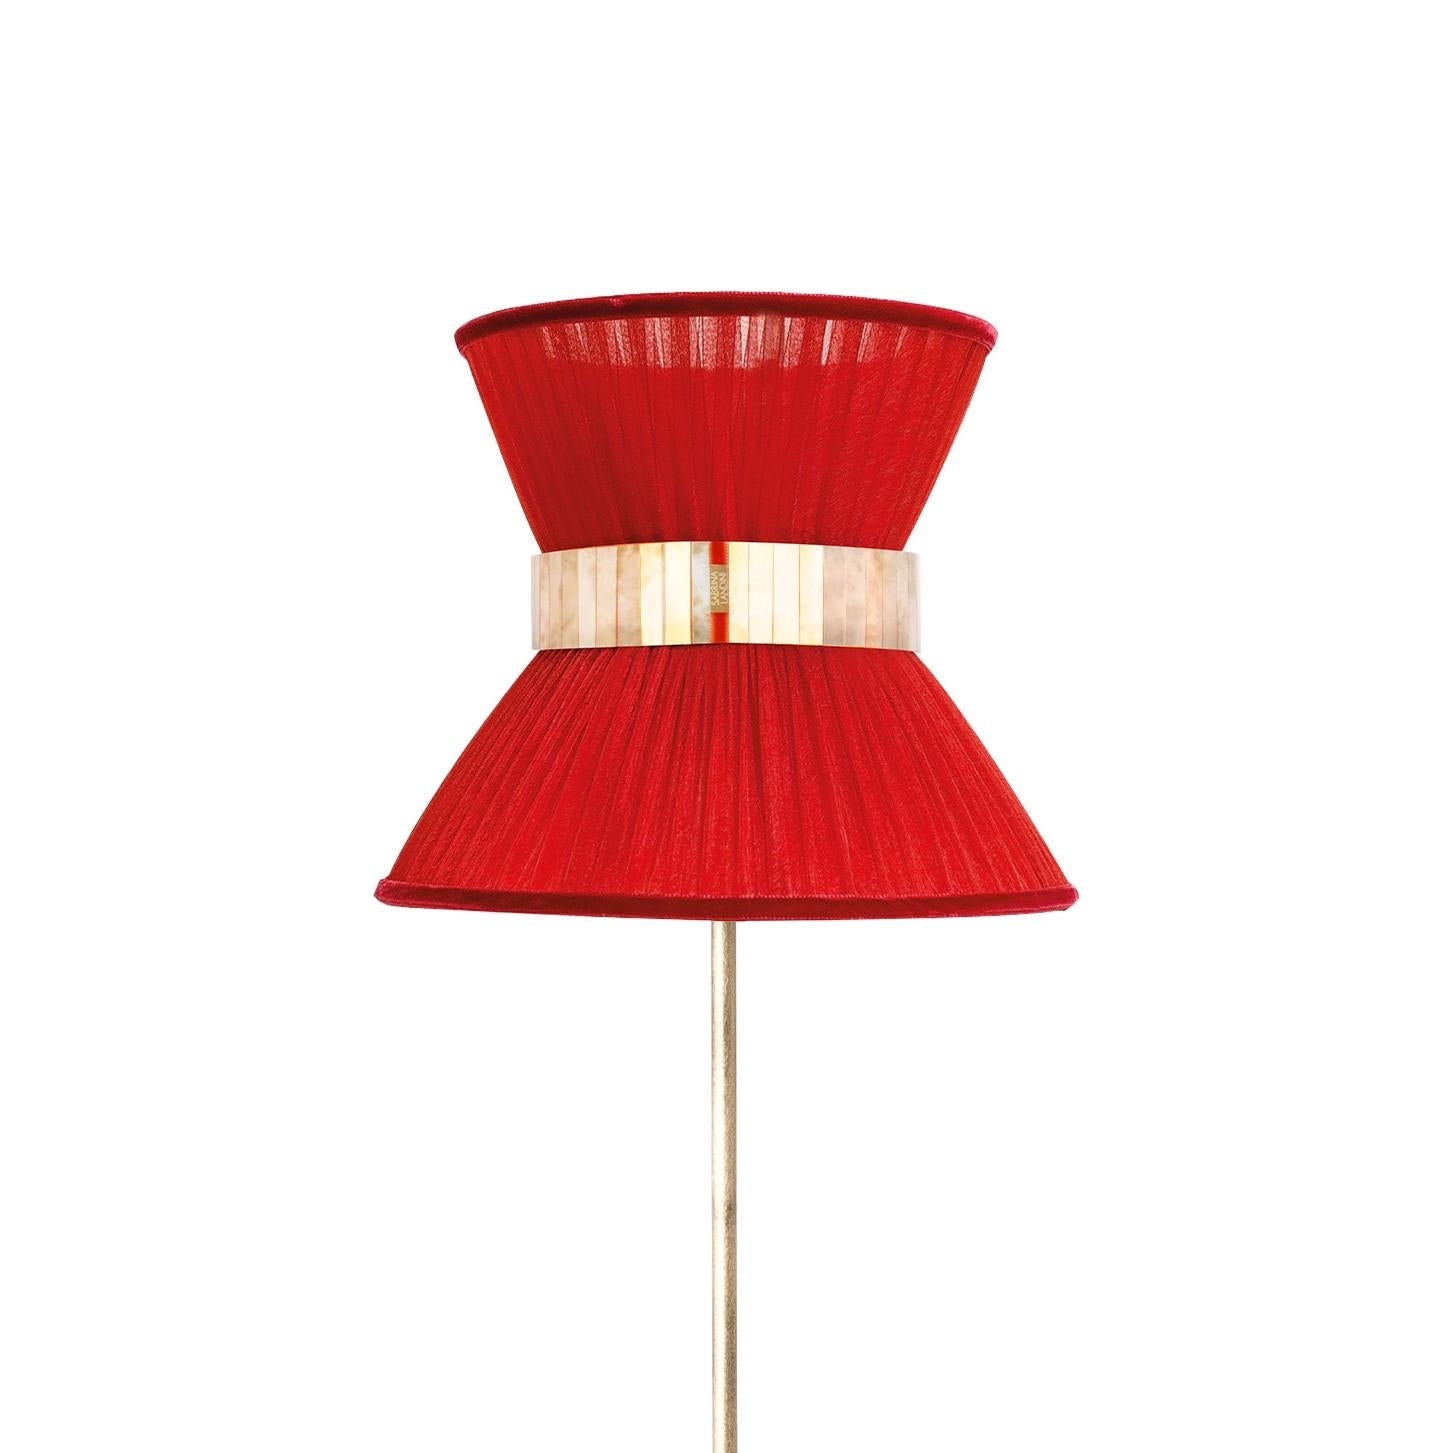 TIFFANY the iconic lamp!

Introducing Sabrina's breathtaking collection of Tiffany lamps.
Tiffany, a timeless lamp, inspired by the international movie “Breakfast at Tiffany” and the talented character Audrey Hepburn, is a contemporary lamp,